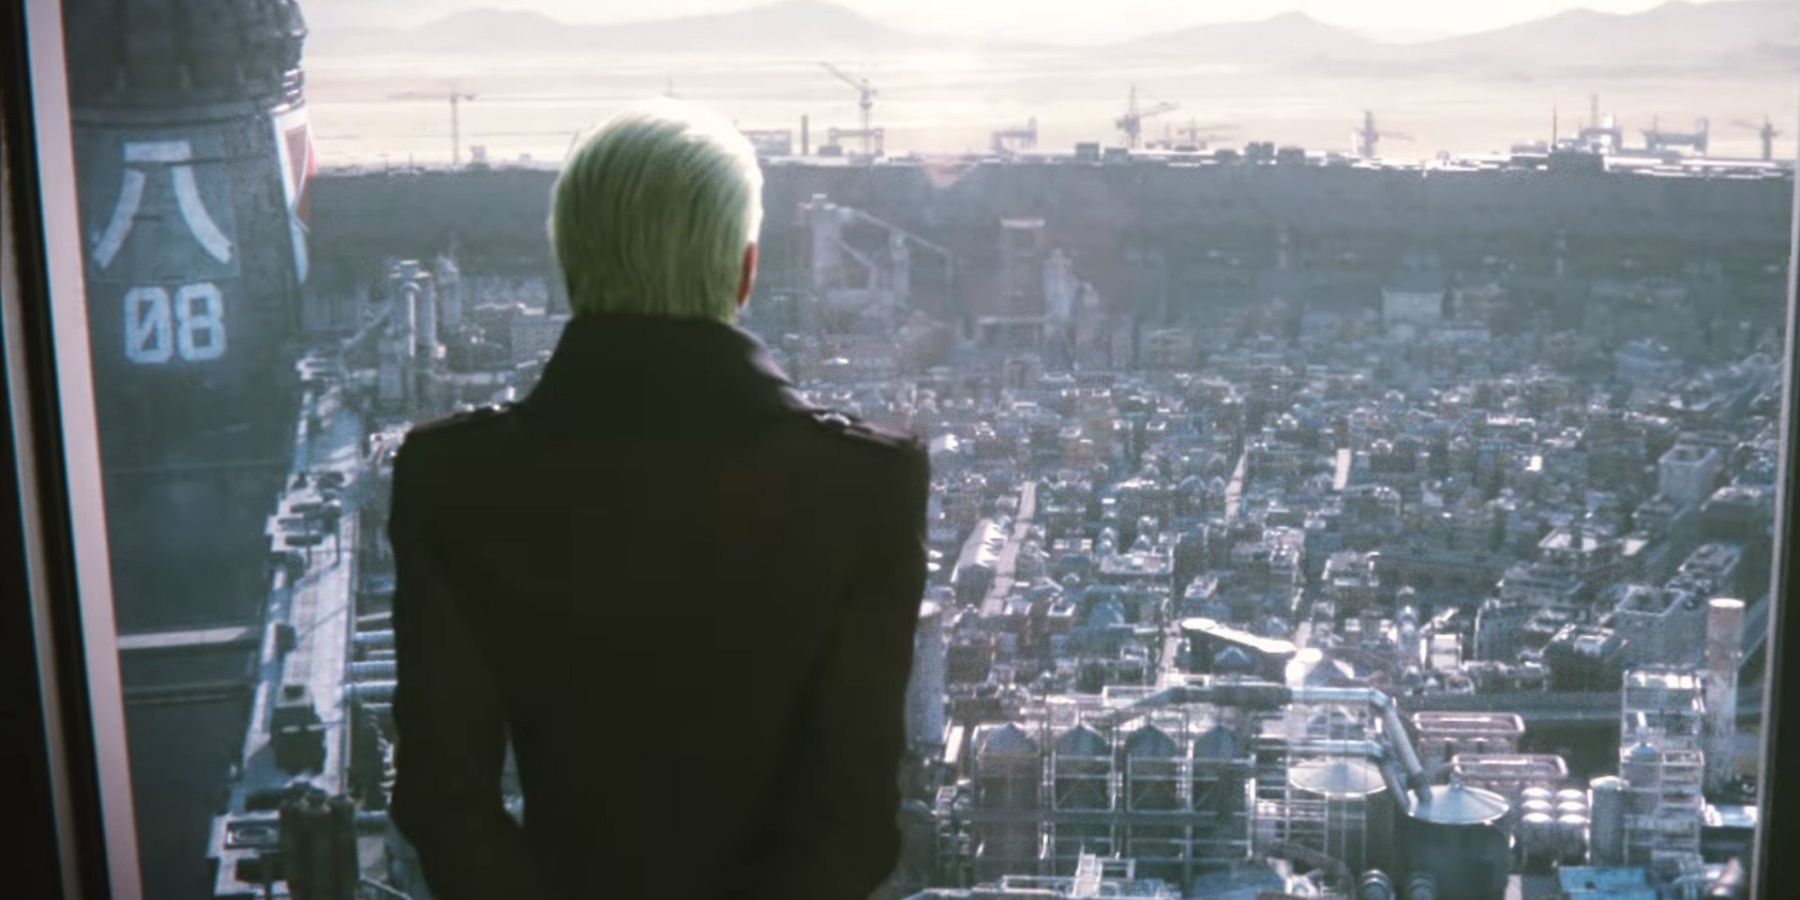 A character from Final Fantasy VII looking out at a city